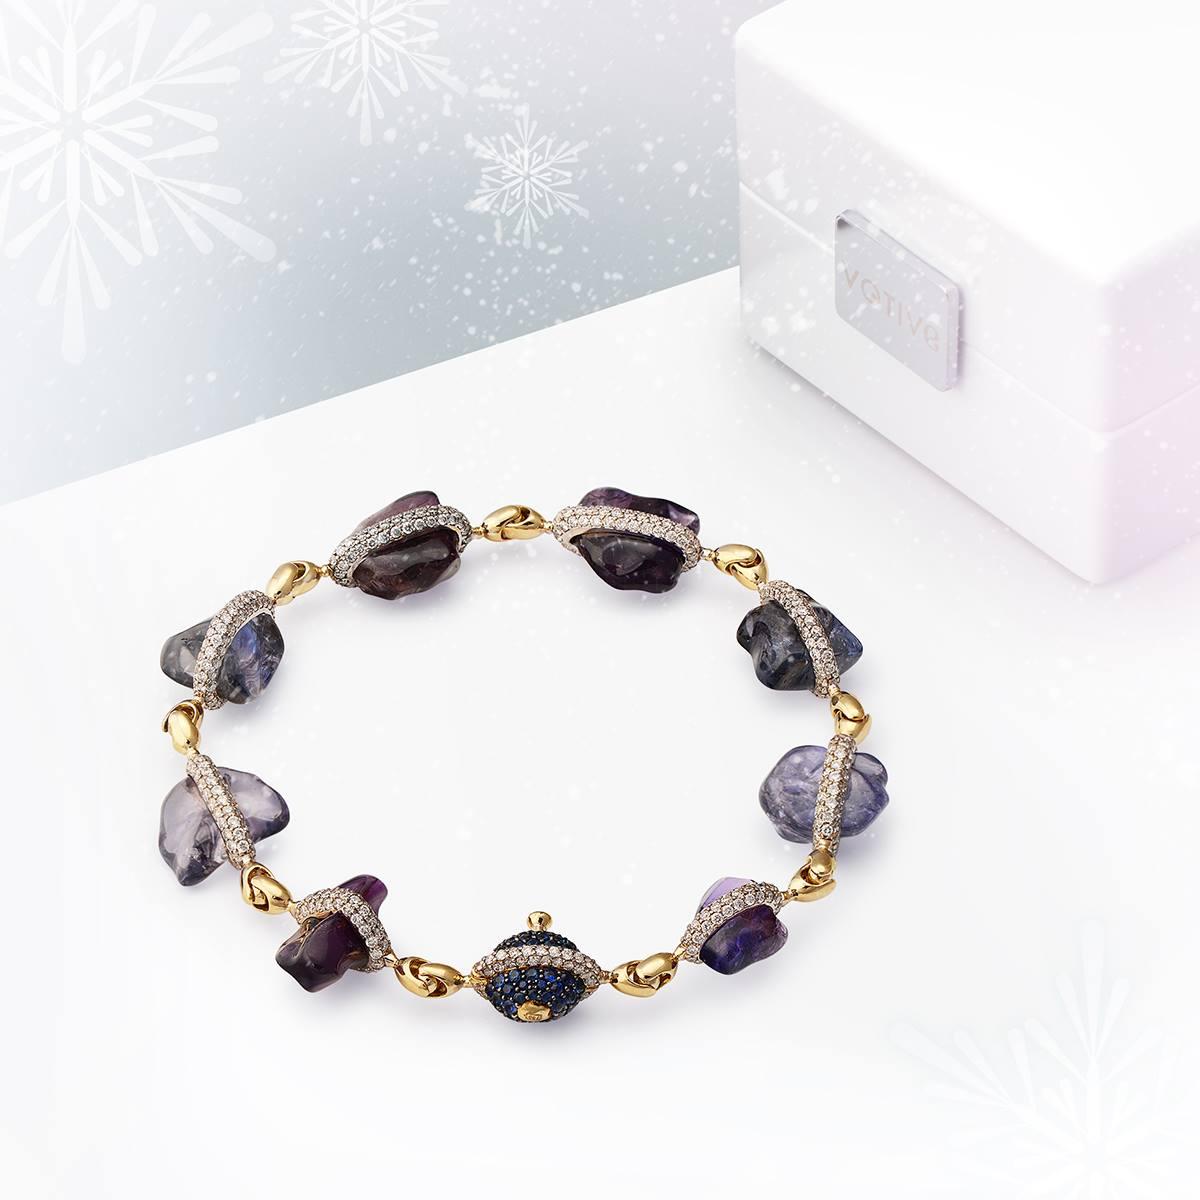 Introducing an extraordinary gem from the Organic Collection by VOTIVE – a bracelet that embodies the essence of natural beauty and exquisite craftsmanship. This distinctive piece boasts uncut yet meticulously polished blue sapphires in an array of